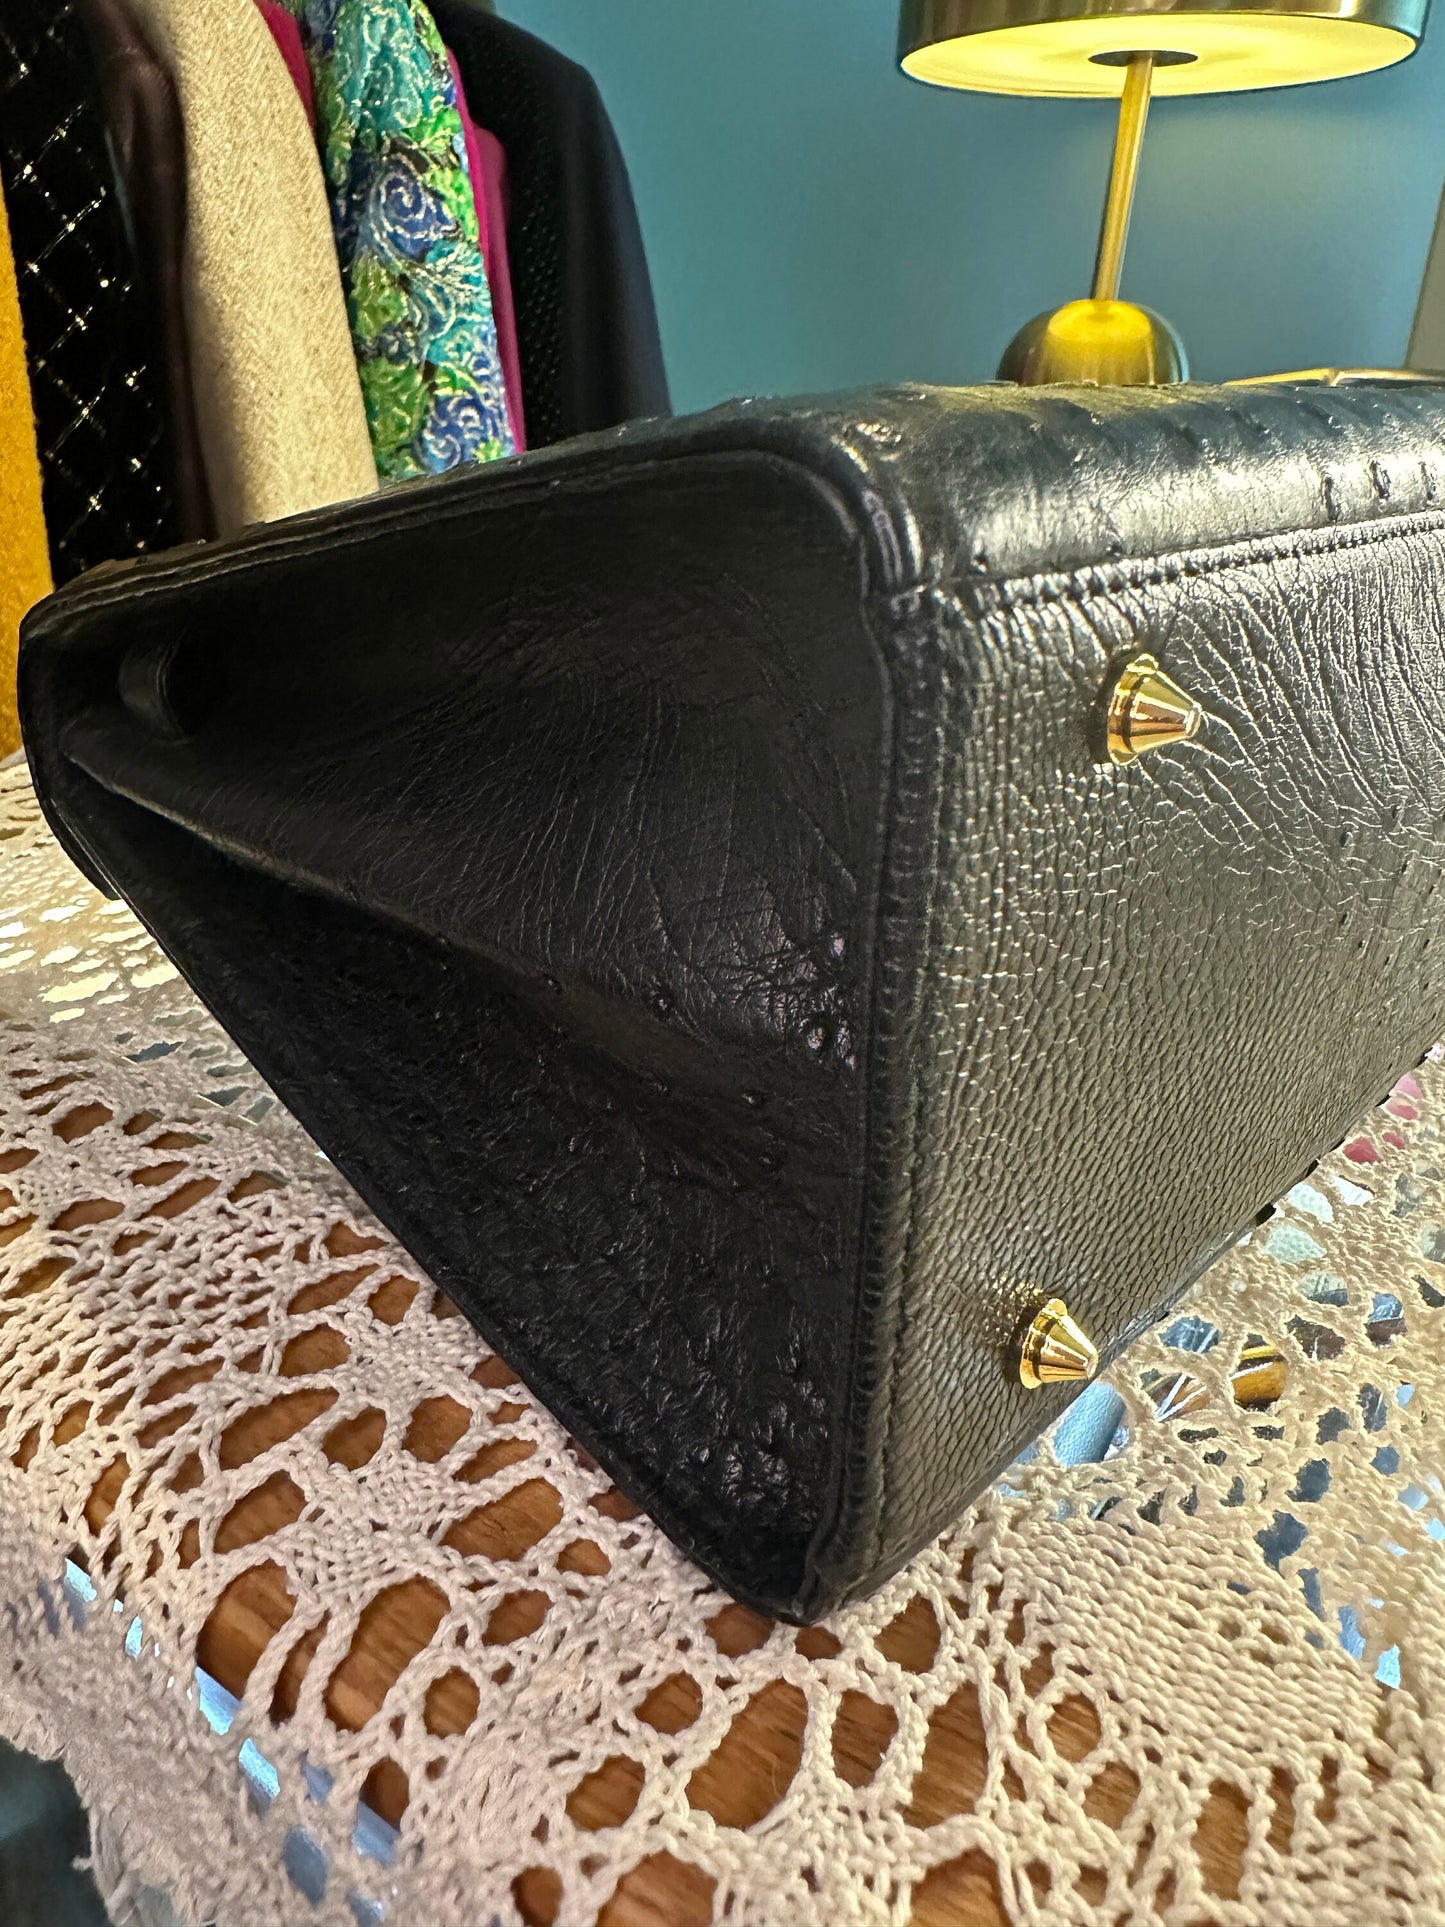 JRA VINTAGE 100% Authentic Genuine, Kelly-style Handbag with Black Ostrich Leather, 1990's, Great Condition